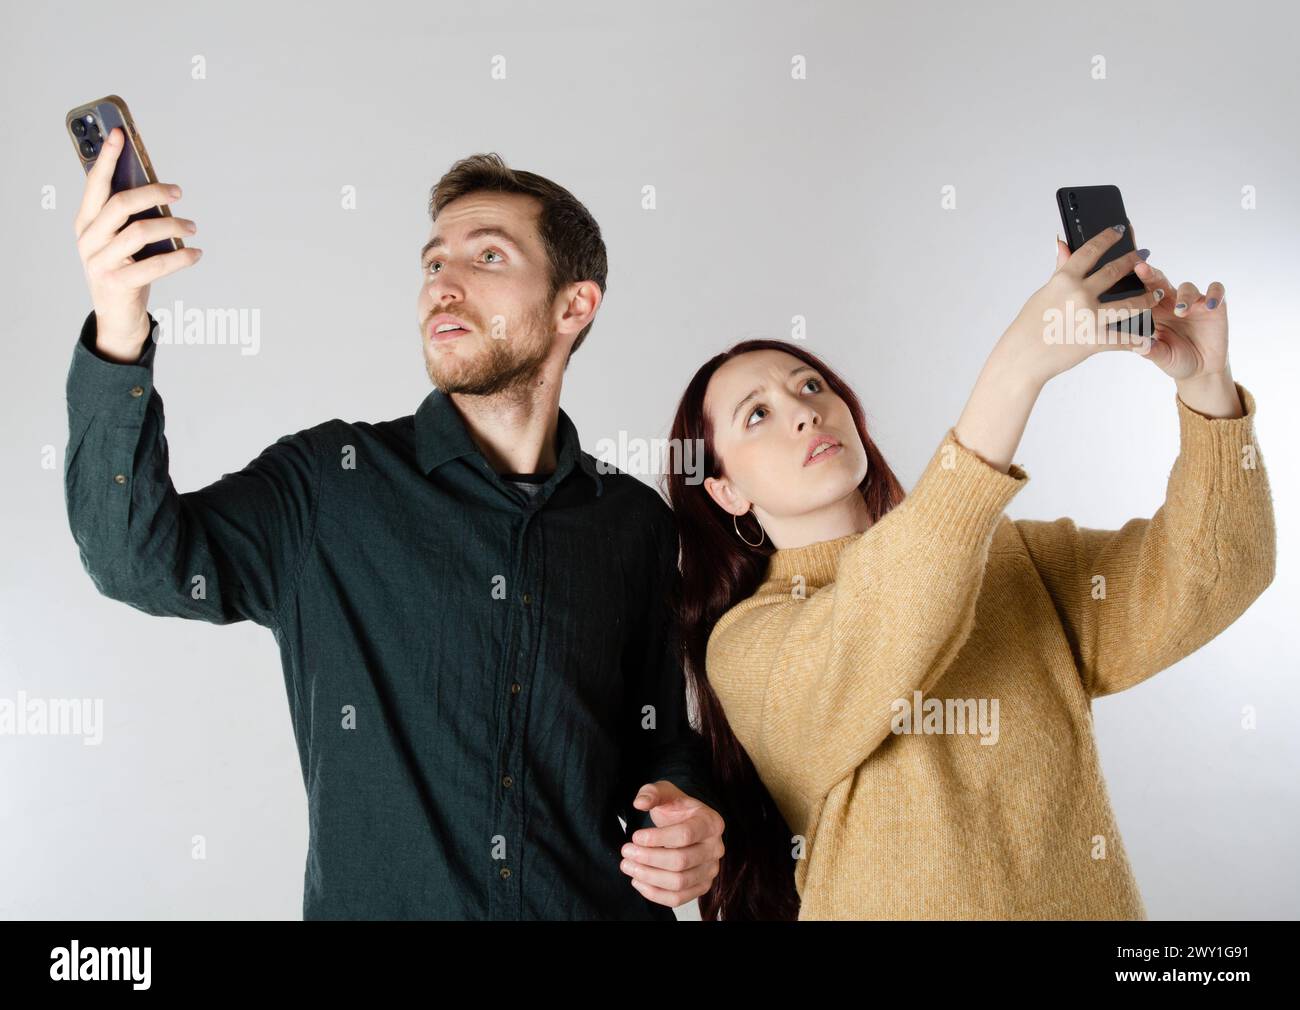 No cell phone network signal. No communication coverage, device contact signal lost. Man and woman search with their smart phones for mobile signal. Stock Photo